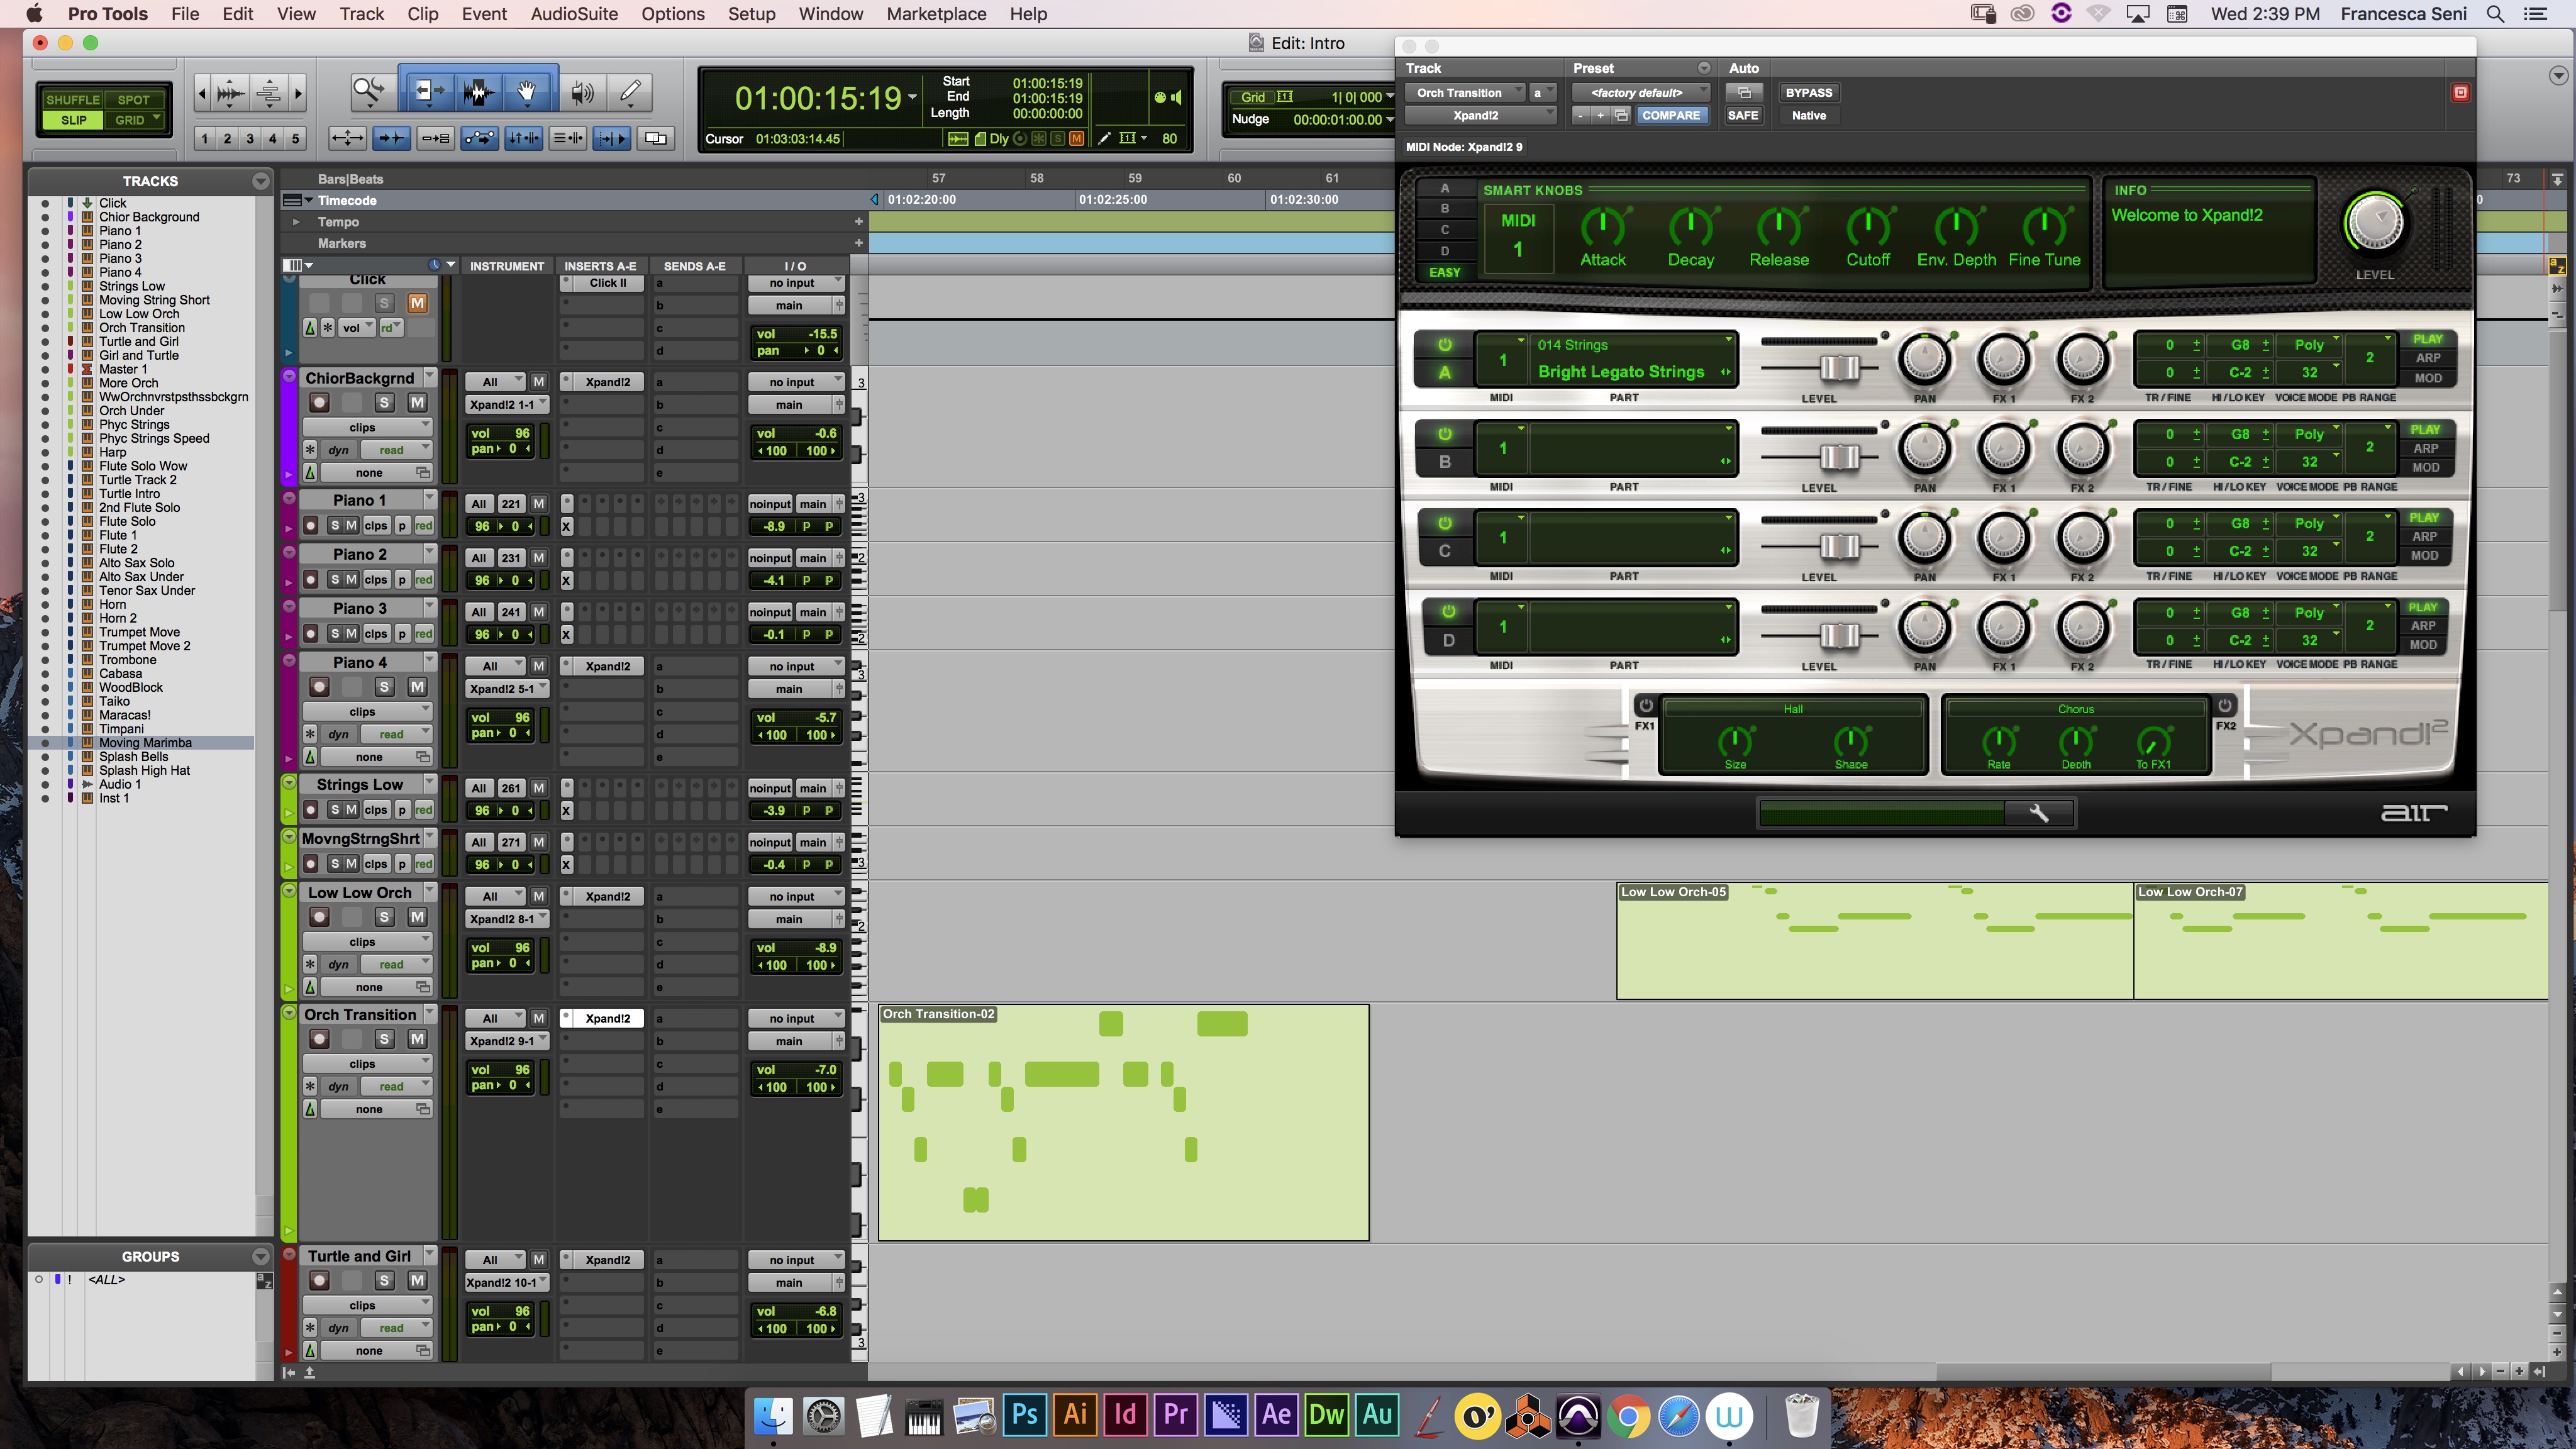 This is a screenshot of the Xpand!2 tool in Pro Tools which I used to mimic sounds of different instruments